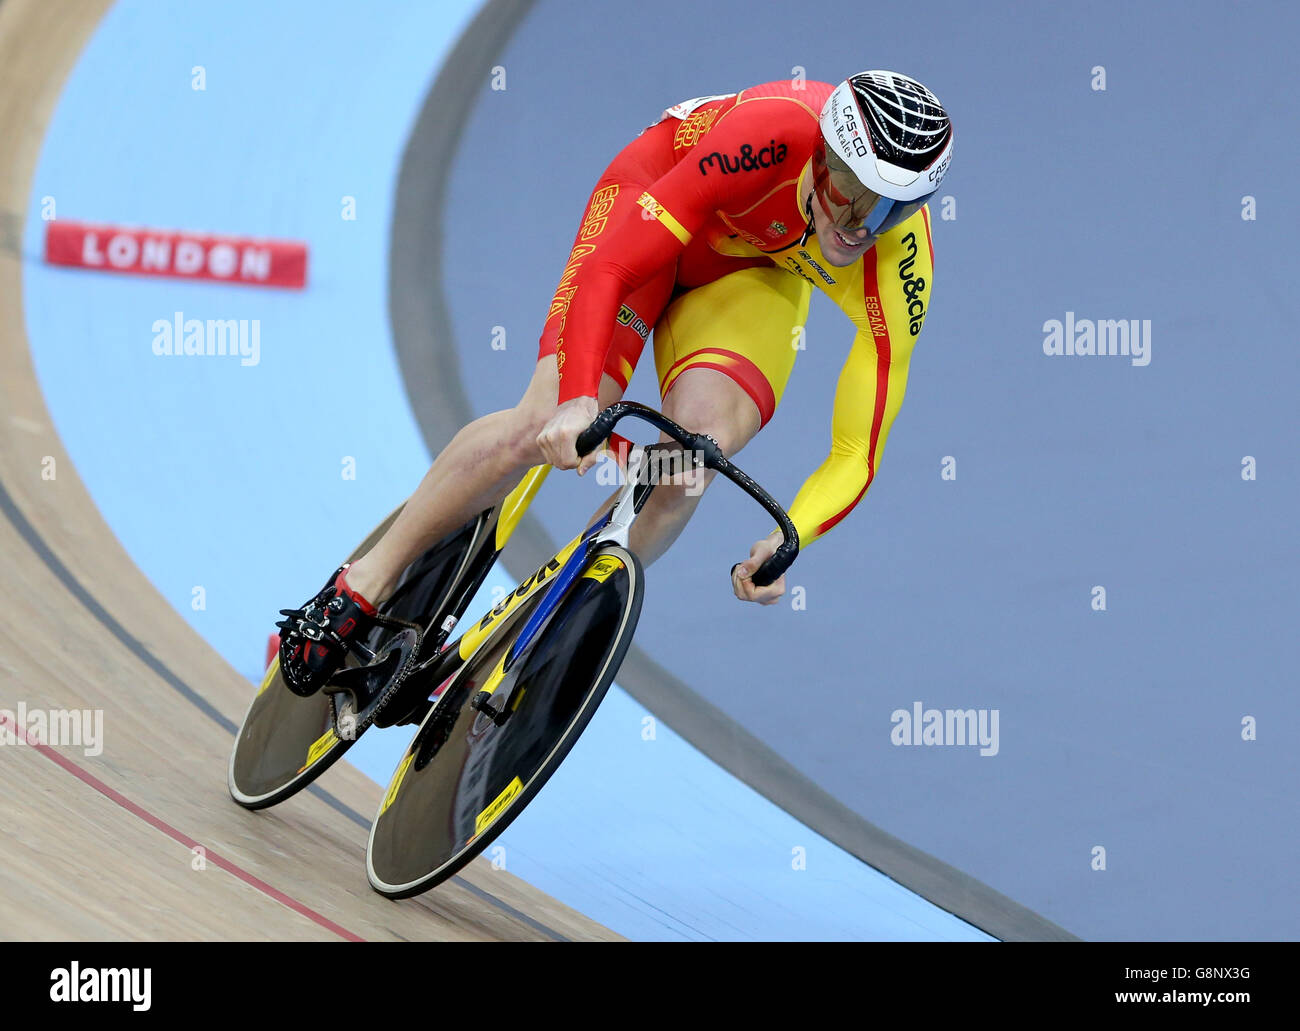 Spain's Juan Peralta Gascon competes in the Men's Sprint during day three of the UCI Track Cycling World Championships at Lee Valley VeloPark, London. PRESS ASSOCIATION Photo. Picture date: Friday March 4, 2016. See PA story CYCLING World. Photo credit should read: Tim Goode/PA Wire. RESTRICTIONS: , No commercial use without prior permission, please contact PA Images for further information: Tel: +44 (0) 115 8447447. Stock Photo